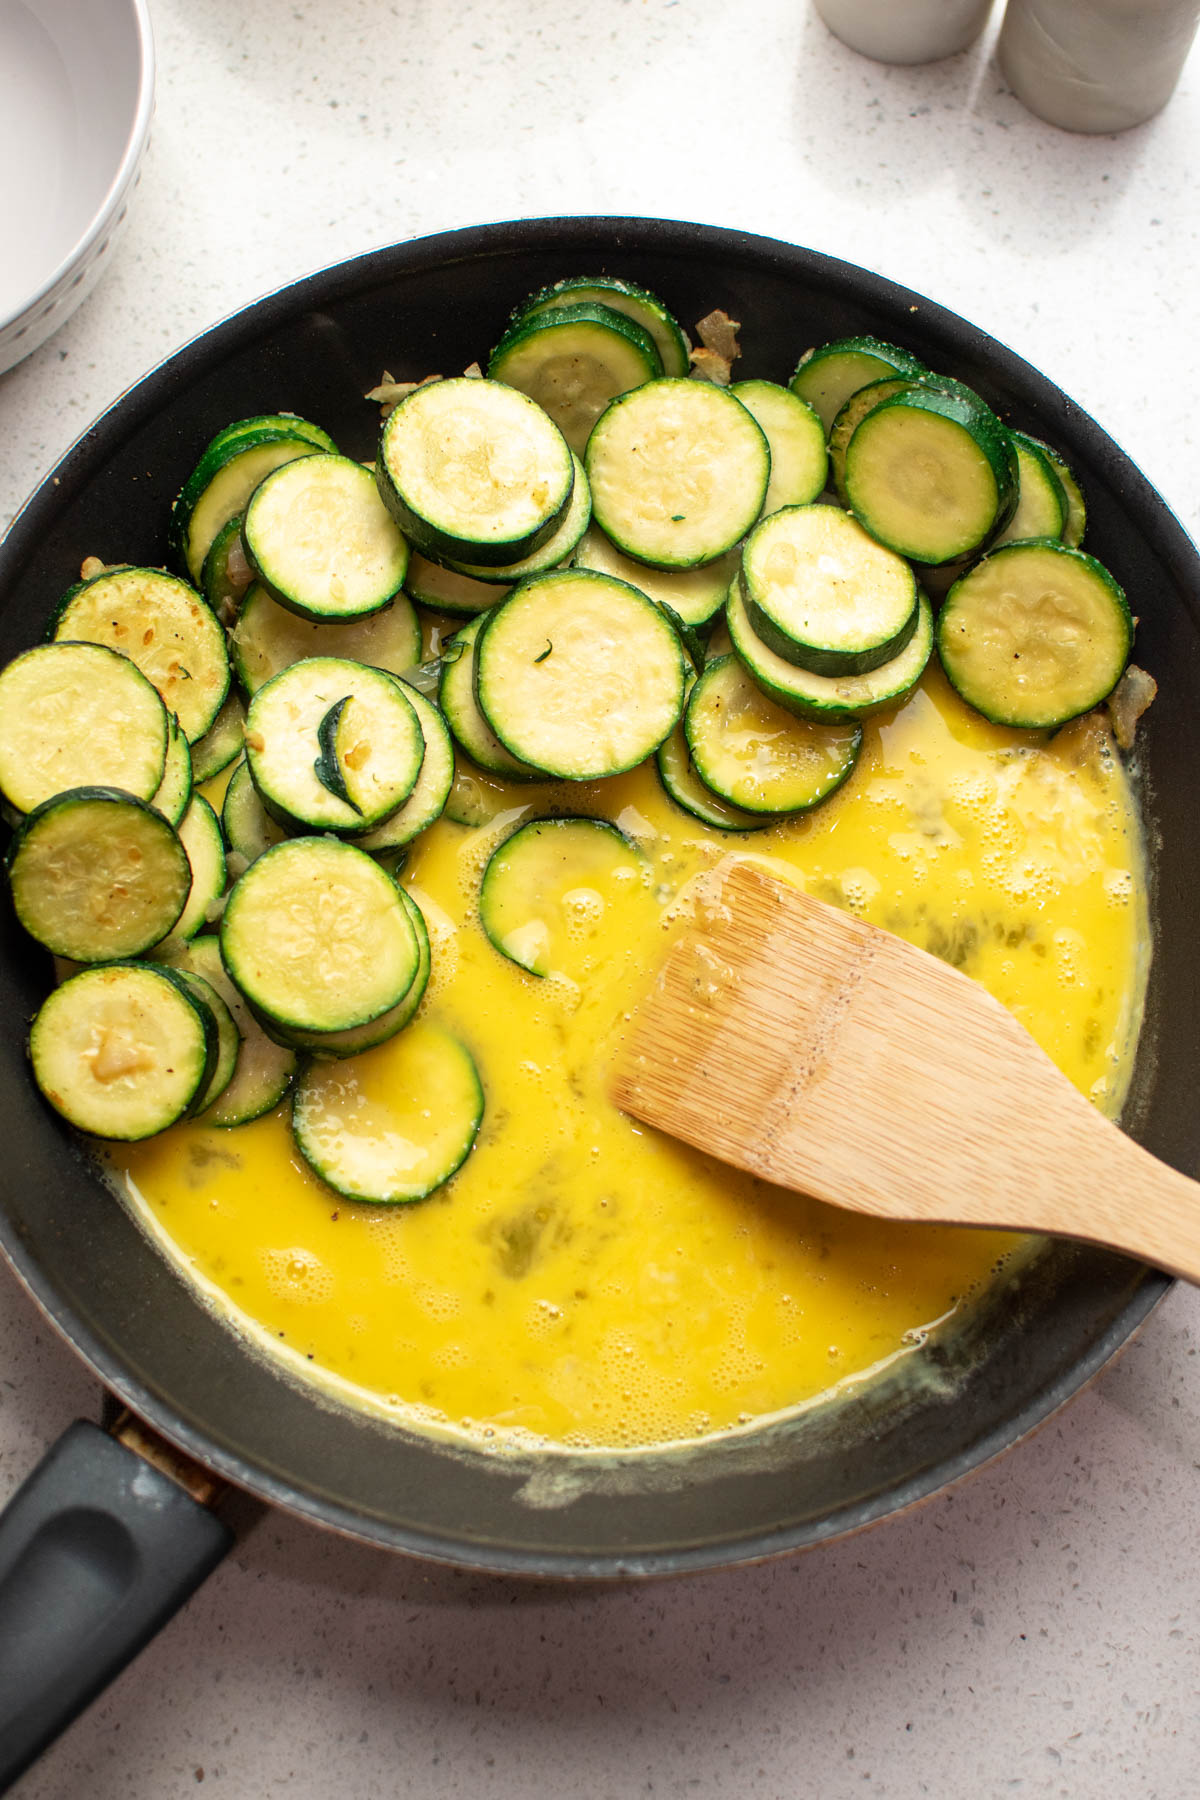 Black frying pan with raw eggs, sauteed zucchini, and wood spoon on countertop.